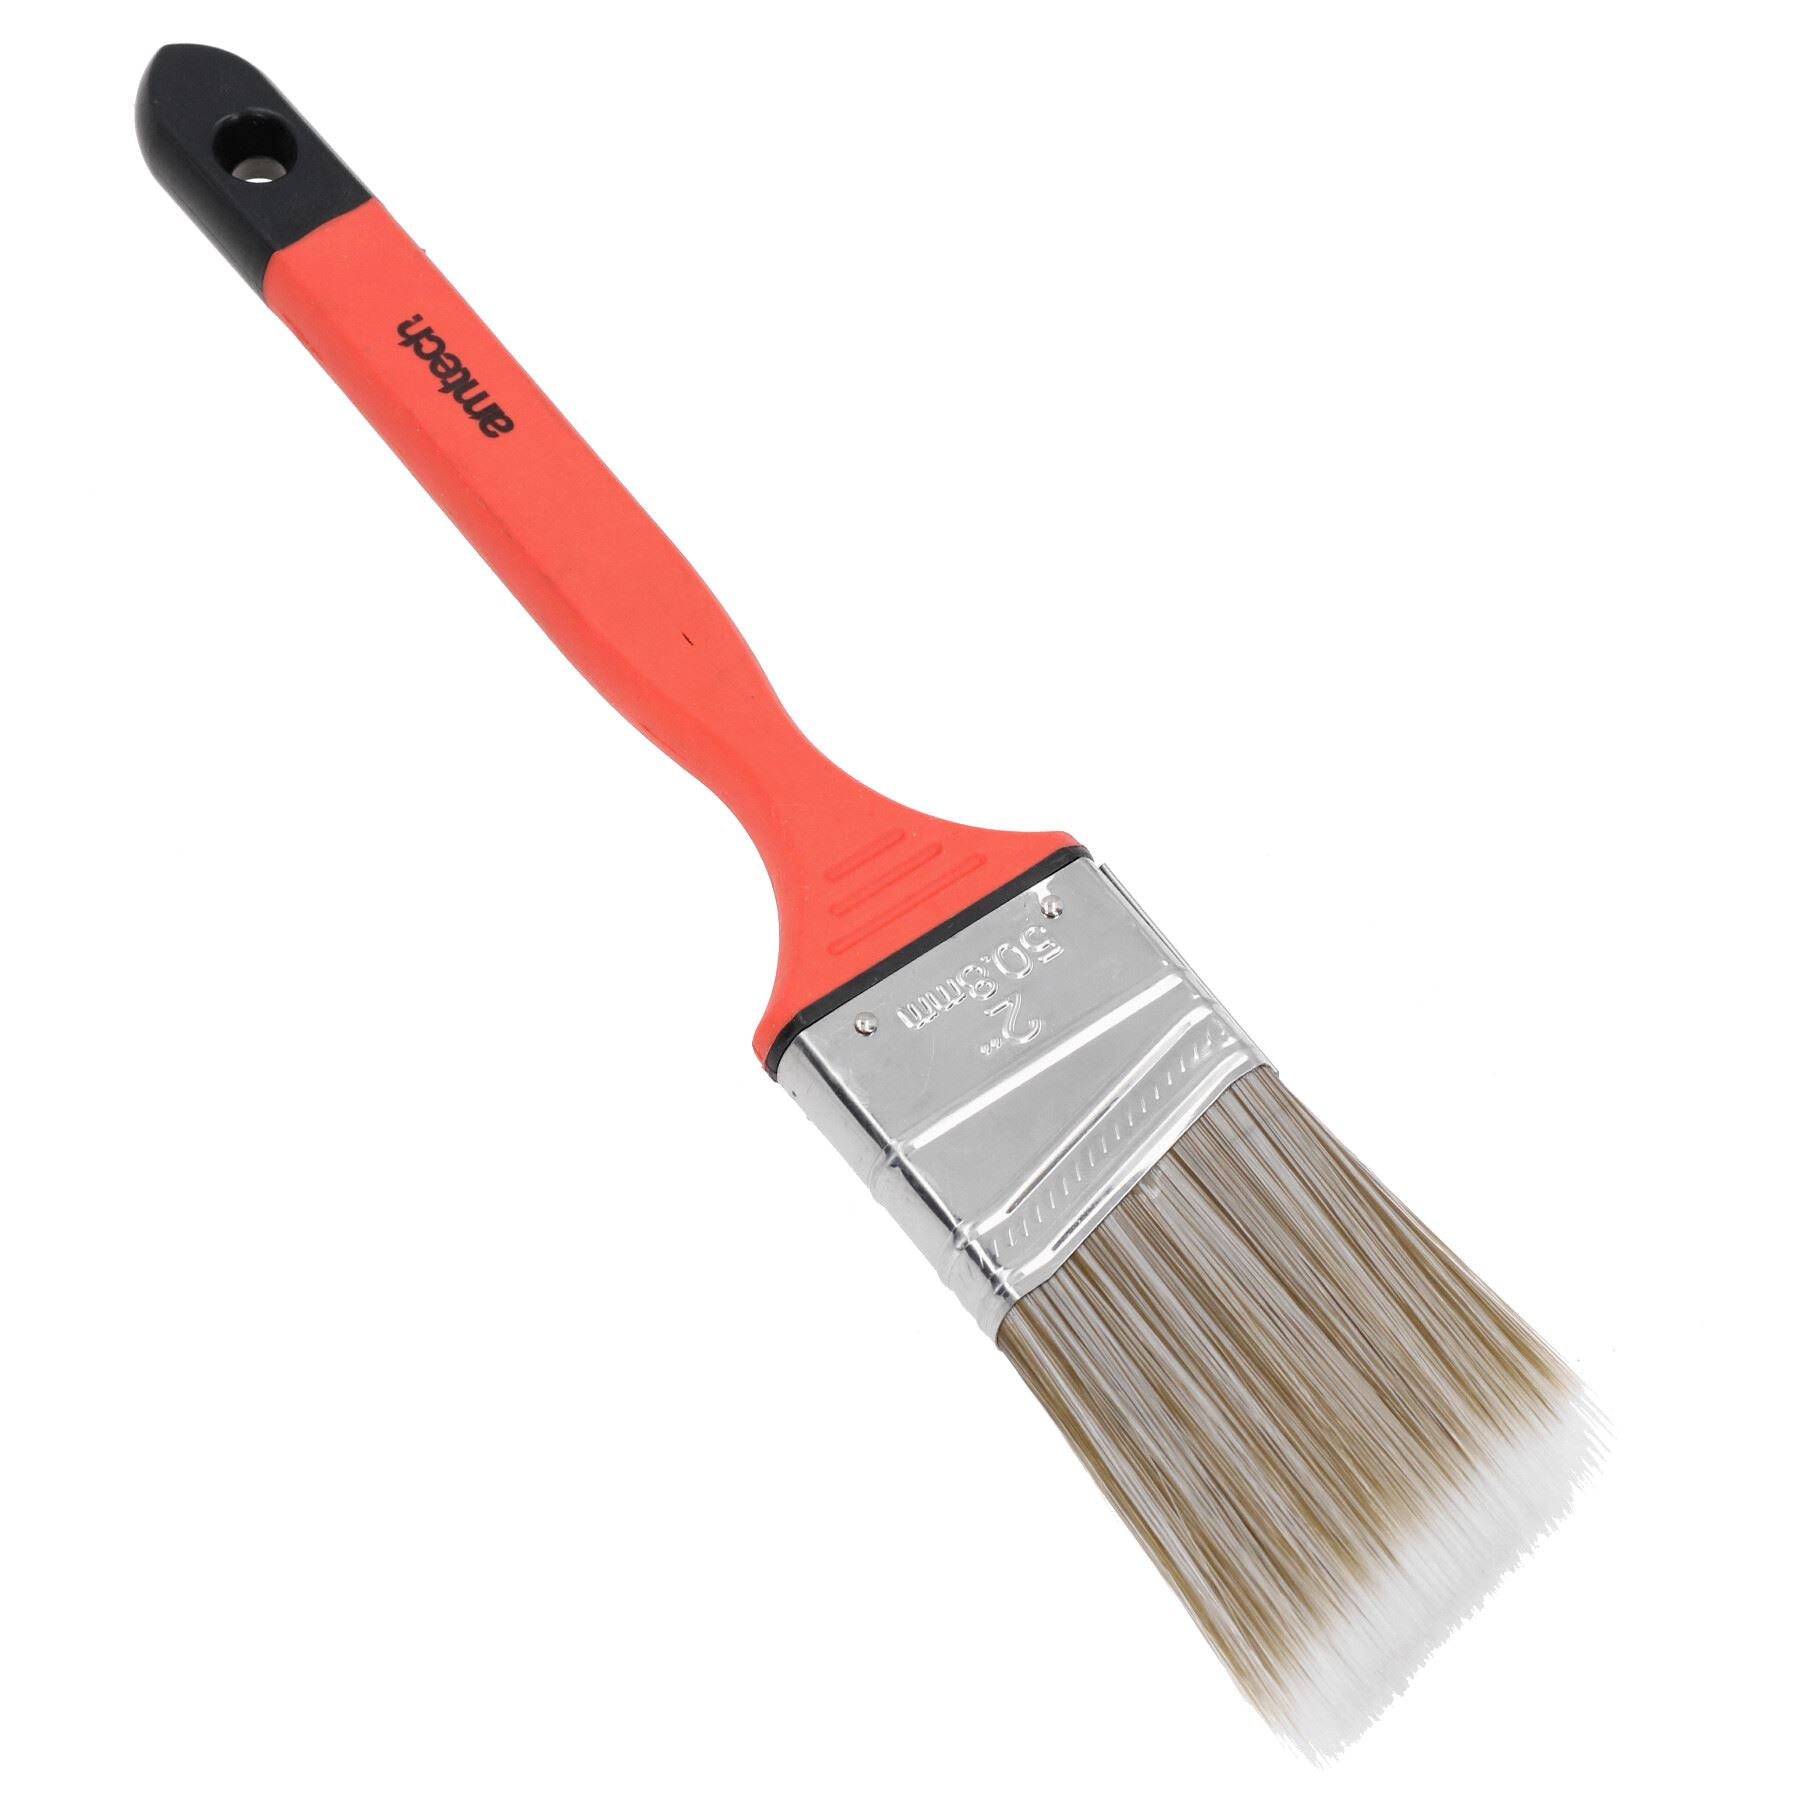 50mm Wide Angled Paint Brush No Bristle Loss Painting + Decorating Soft Grip